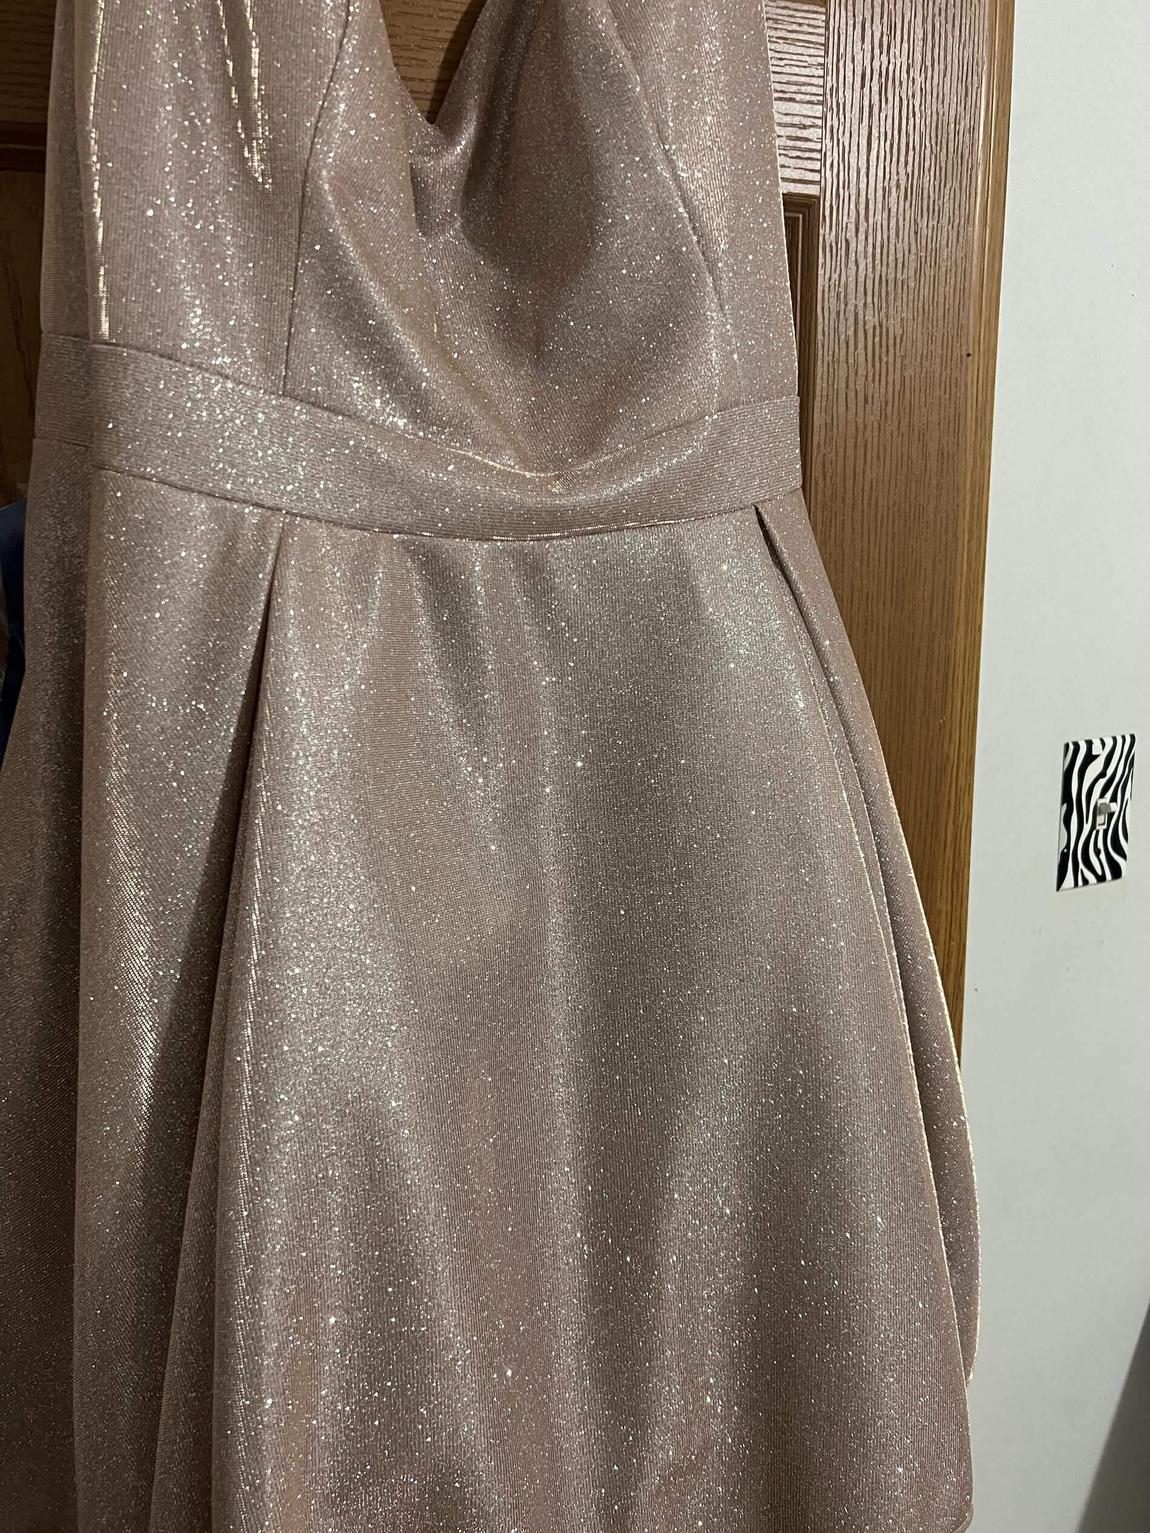 Plus Size 22 Pageant Off The Shoulder Nude Cocktail Dress on Queenly